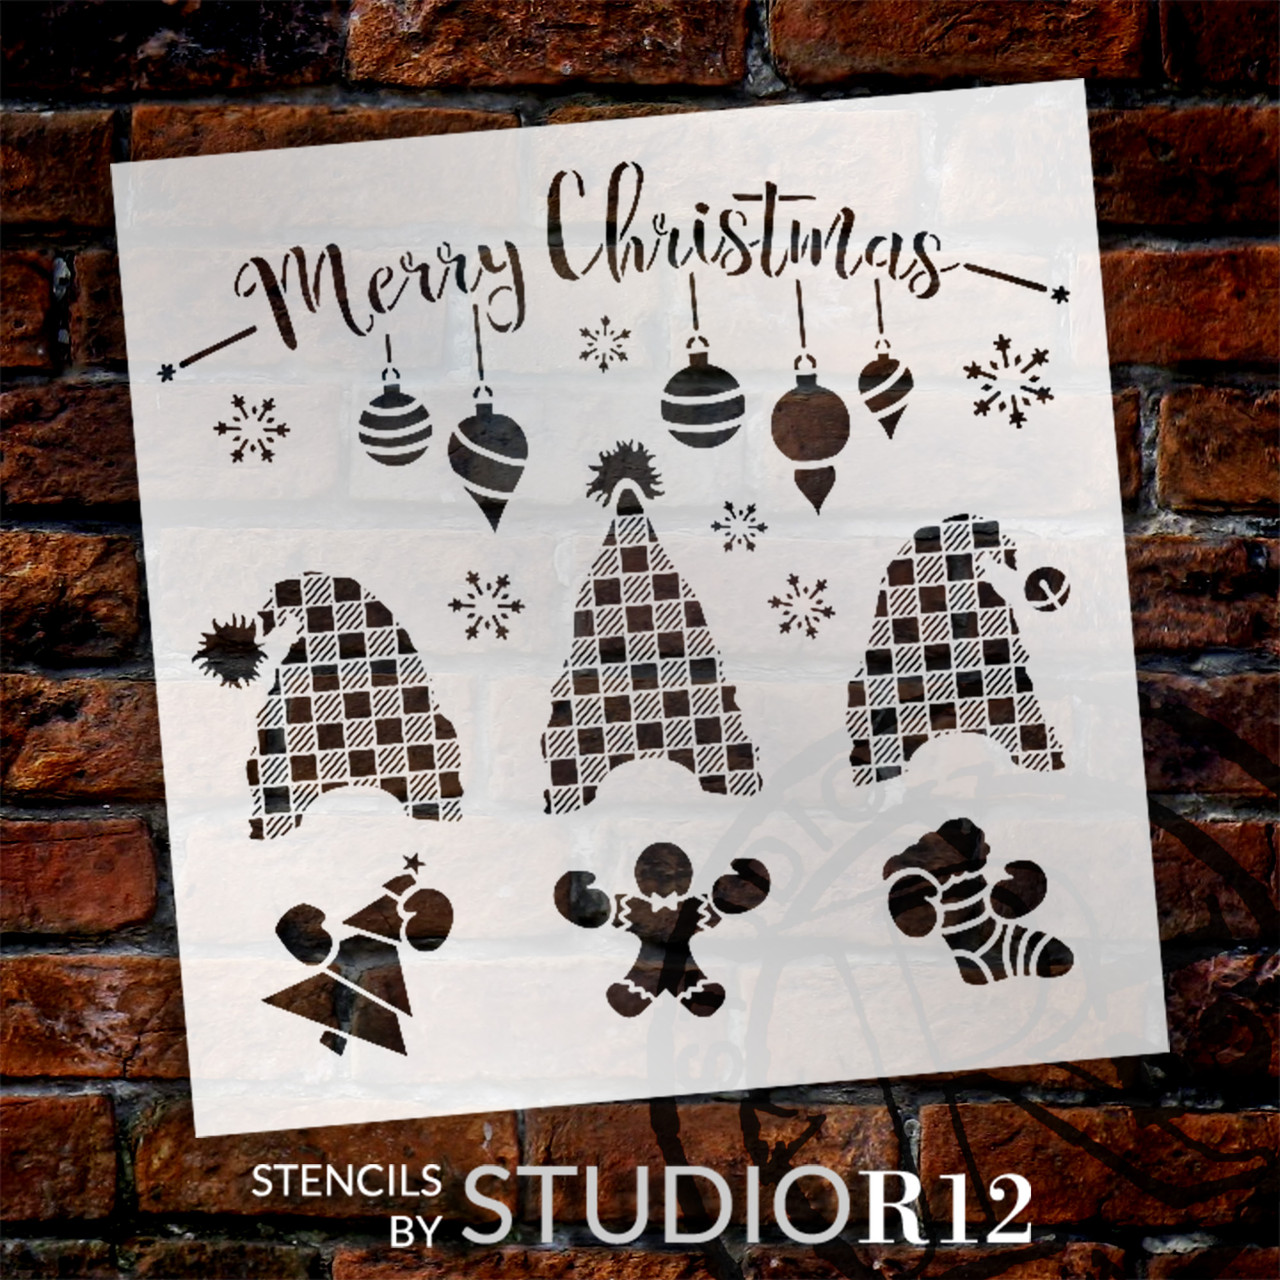 Merry Christmas Gnomes w/ Buffalo Plaid Hats Stencil by StudioR12 - Select Size - USA Made - Craft DIY Winter Home Decor | Paint Whimsical Wood Sign